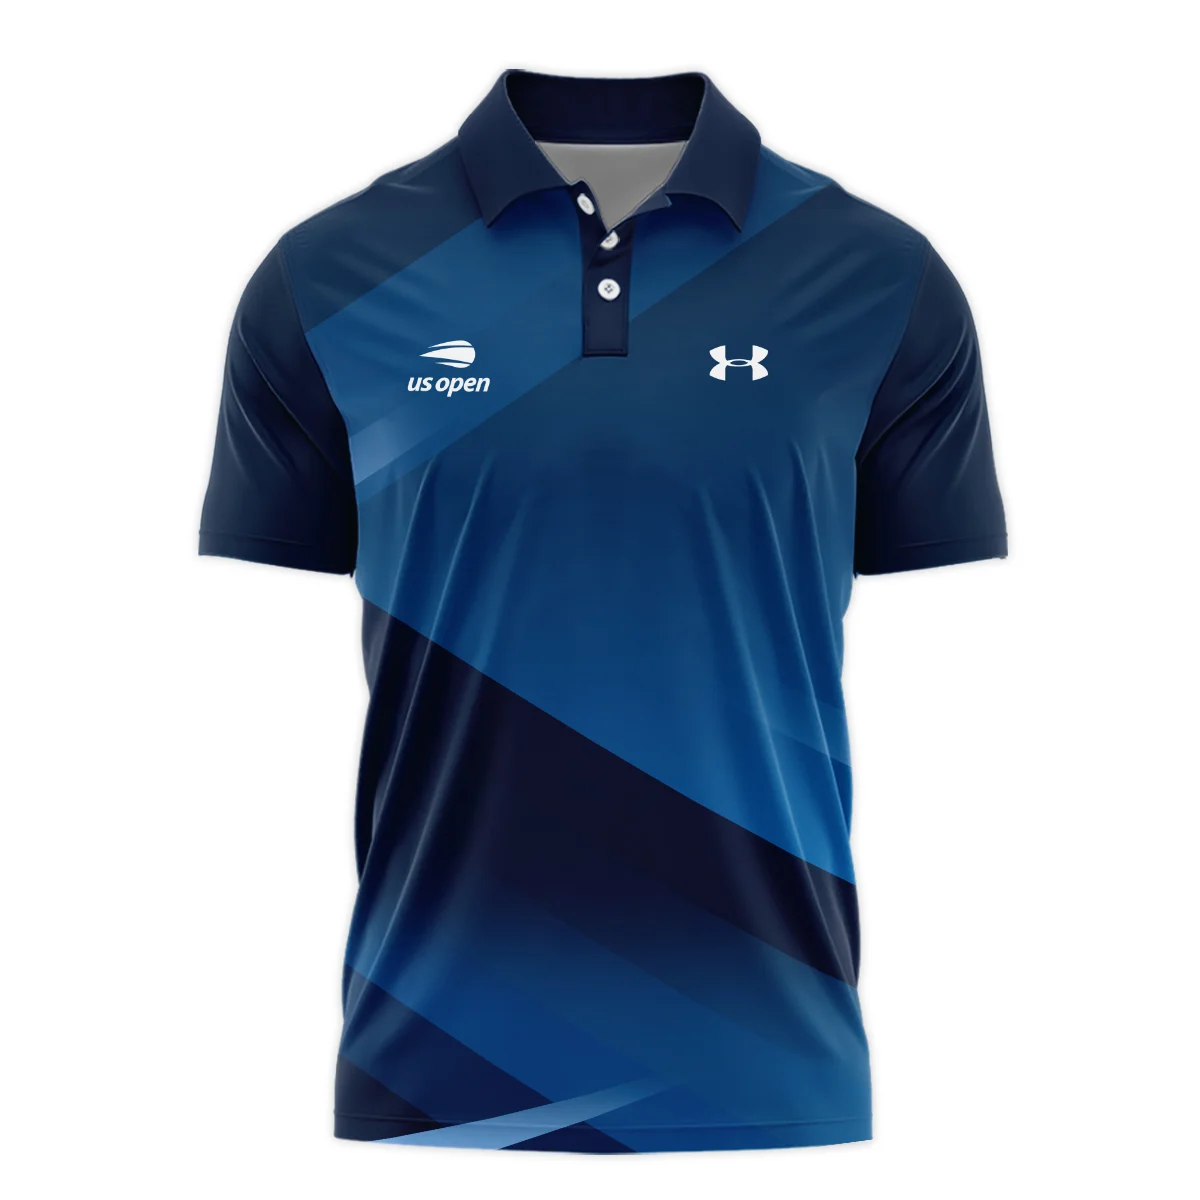 US Open Tennis Champions Dark Blue Background Under Armour Polo Shirt Style Classic Polo Shirt For Men